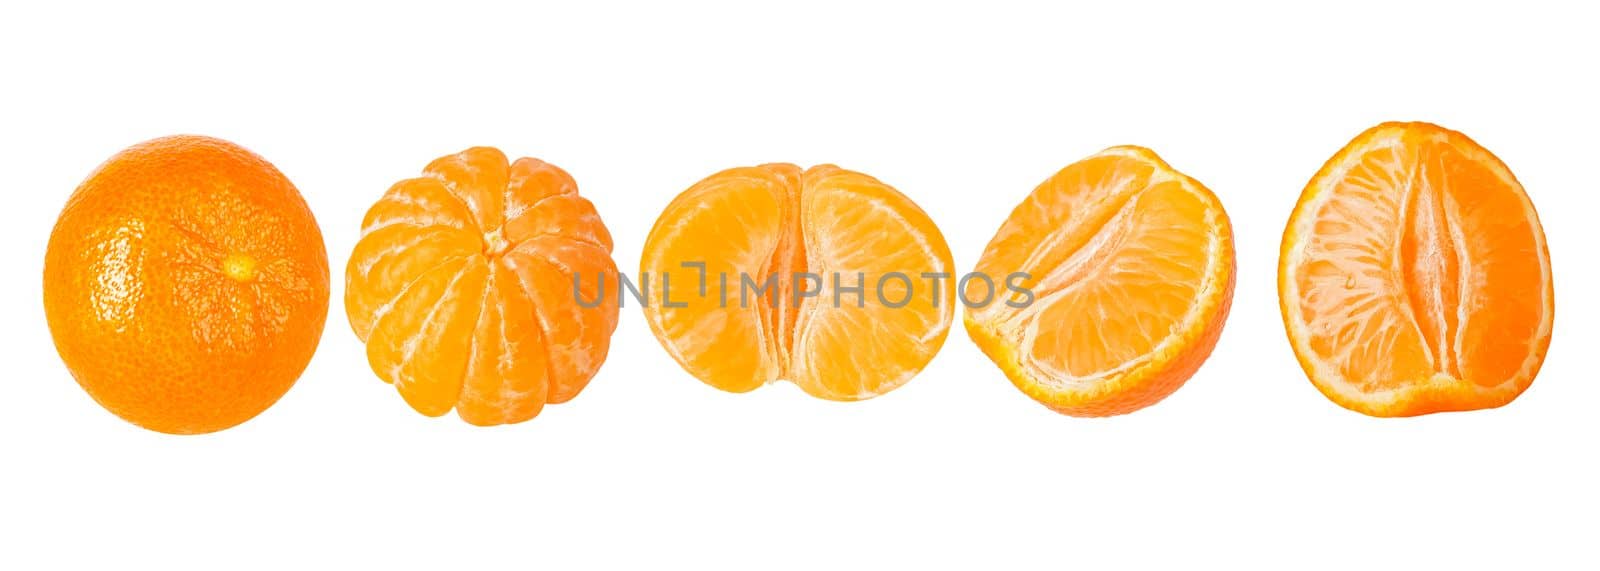 Clementine fruits isolated on a white background by Ciorba